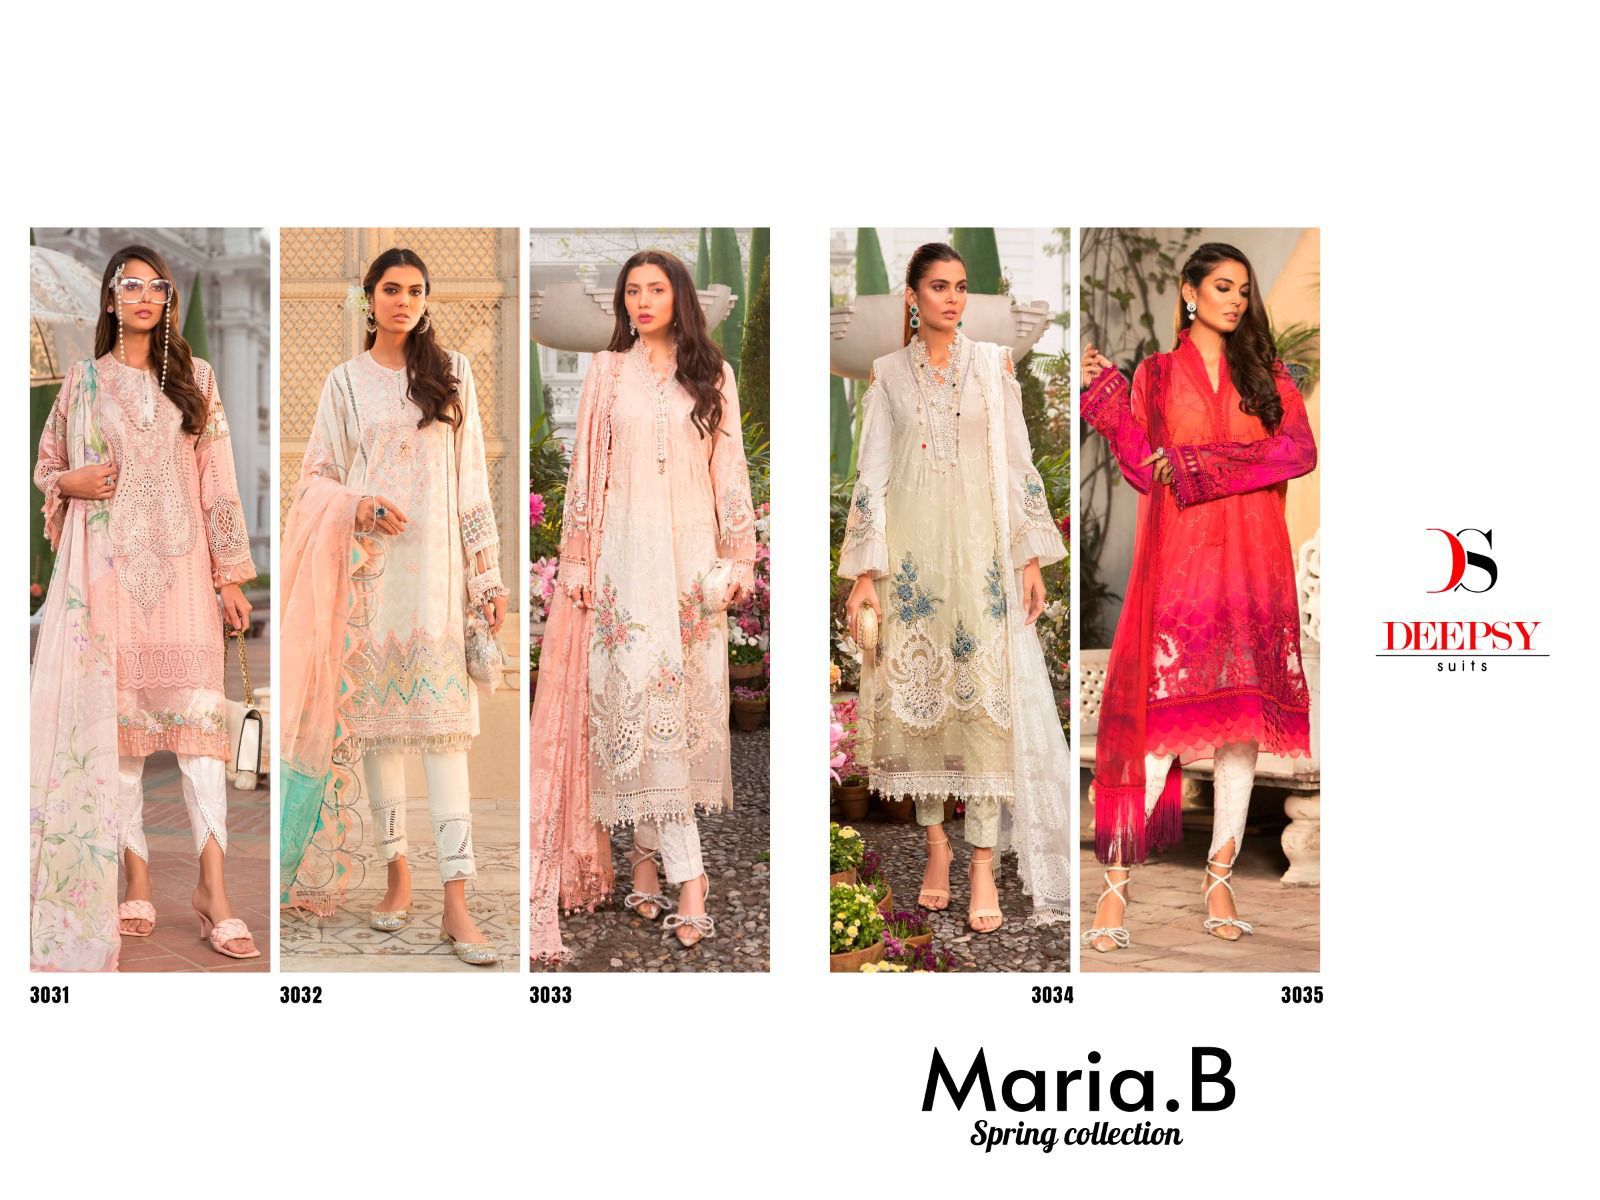 Deepsy Maria B Spring collection 1